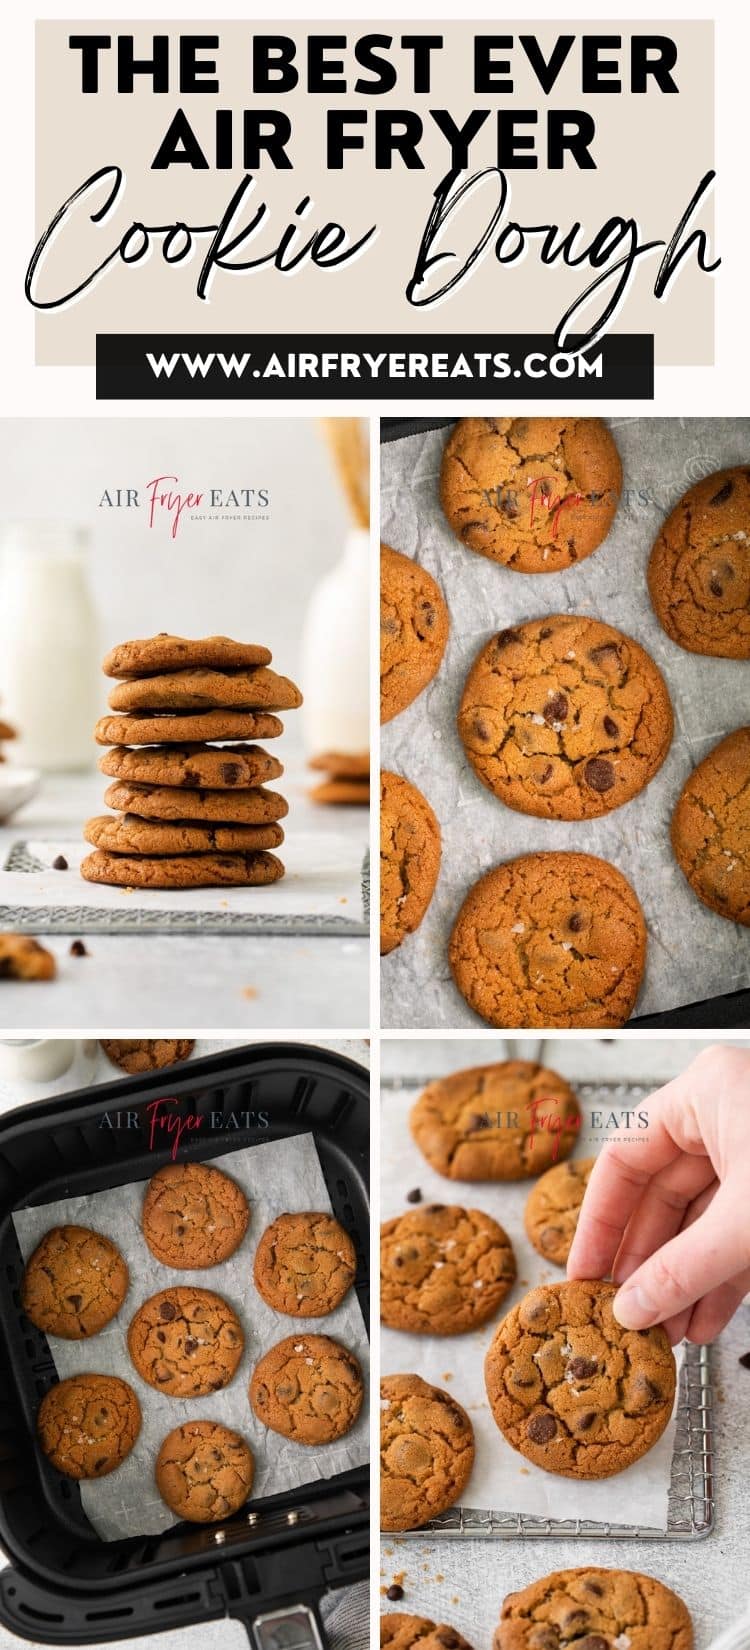 This Cookie Dough In Air Fryer recipe is the perfect quick and easy way to satisfy your sweet tooth. We take pre-made cookie dough and bake it in the air fryer, which gives you cookies that are golden brown on the outside and fudgy on the inside. via @vegetarianmamma